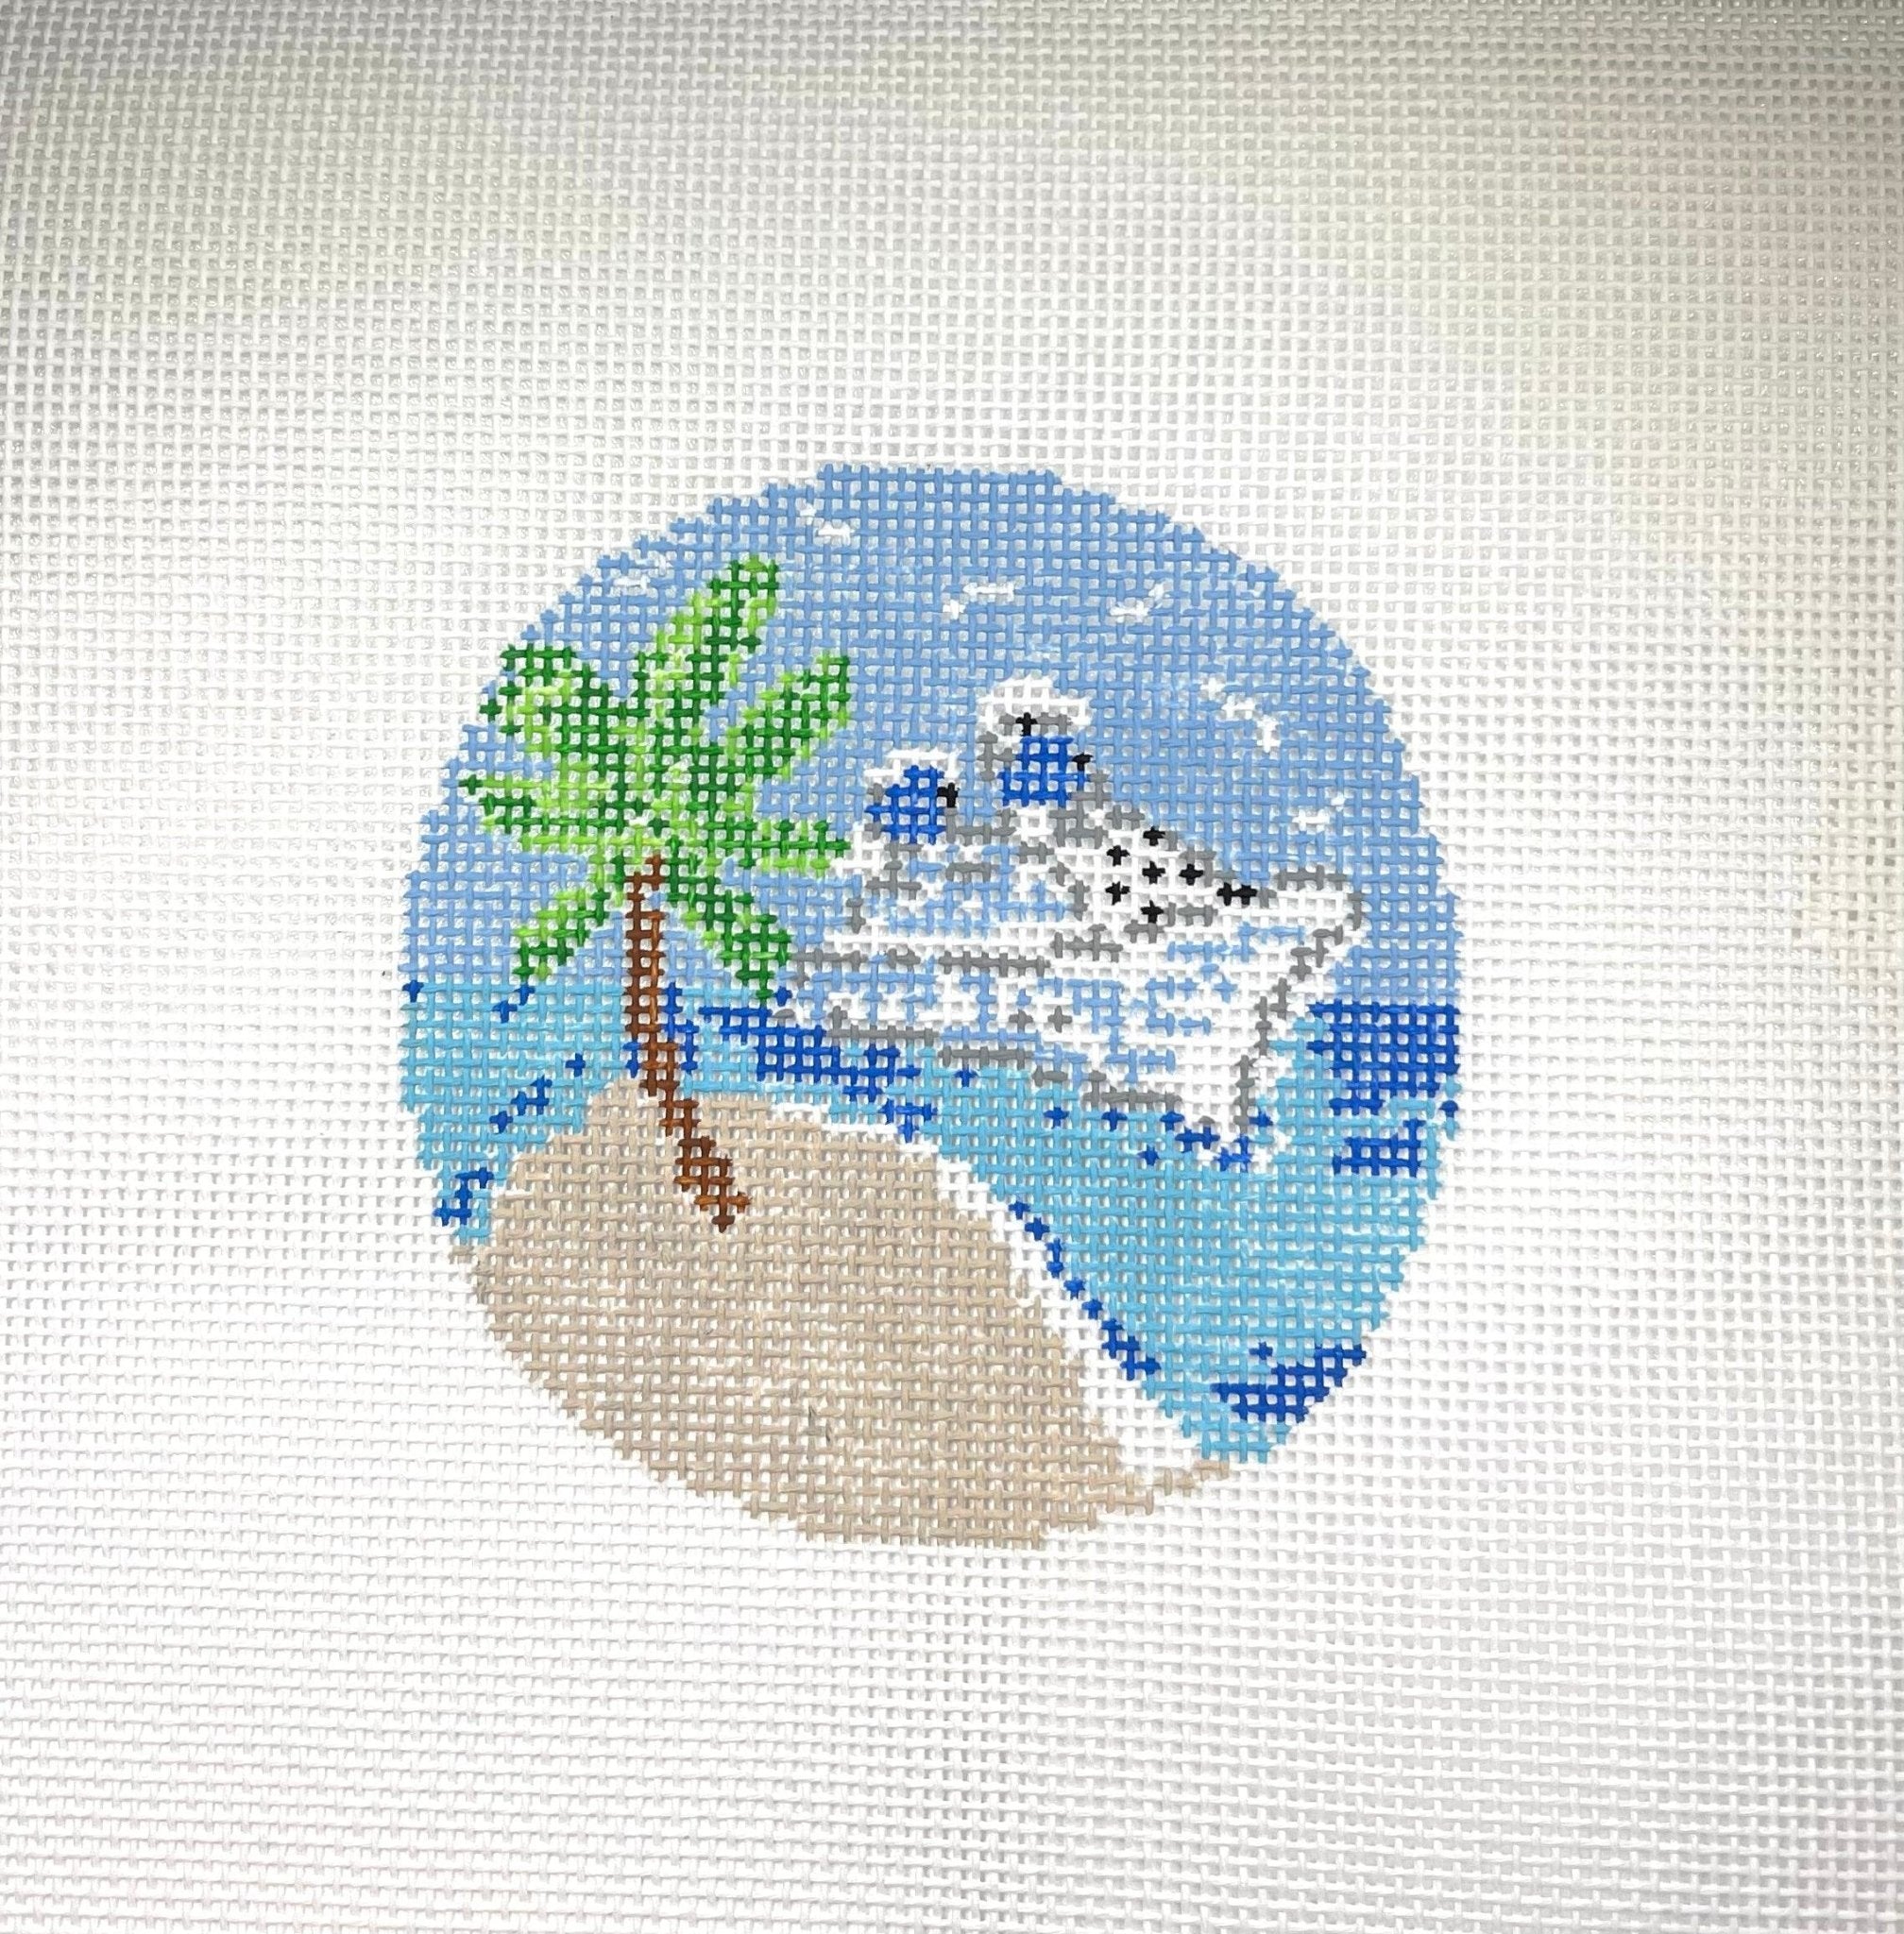 Cruise Ship ornament canvas - Needlepoint by Laura